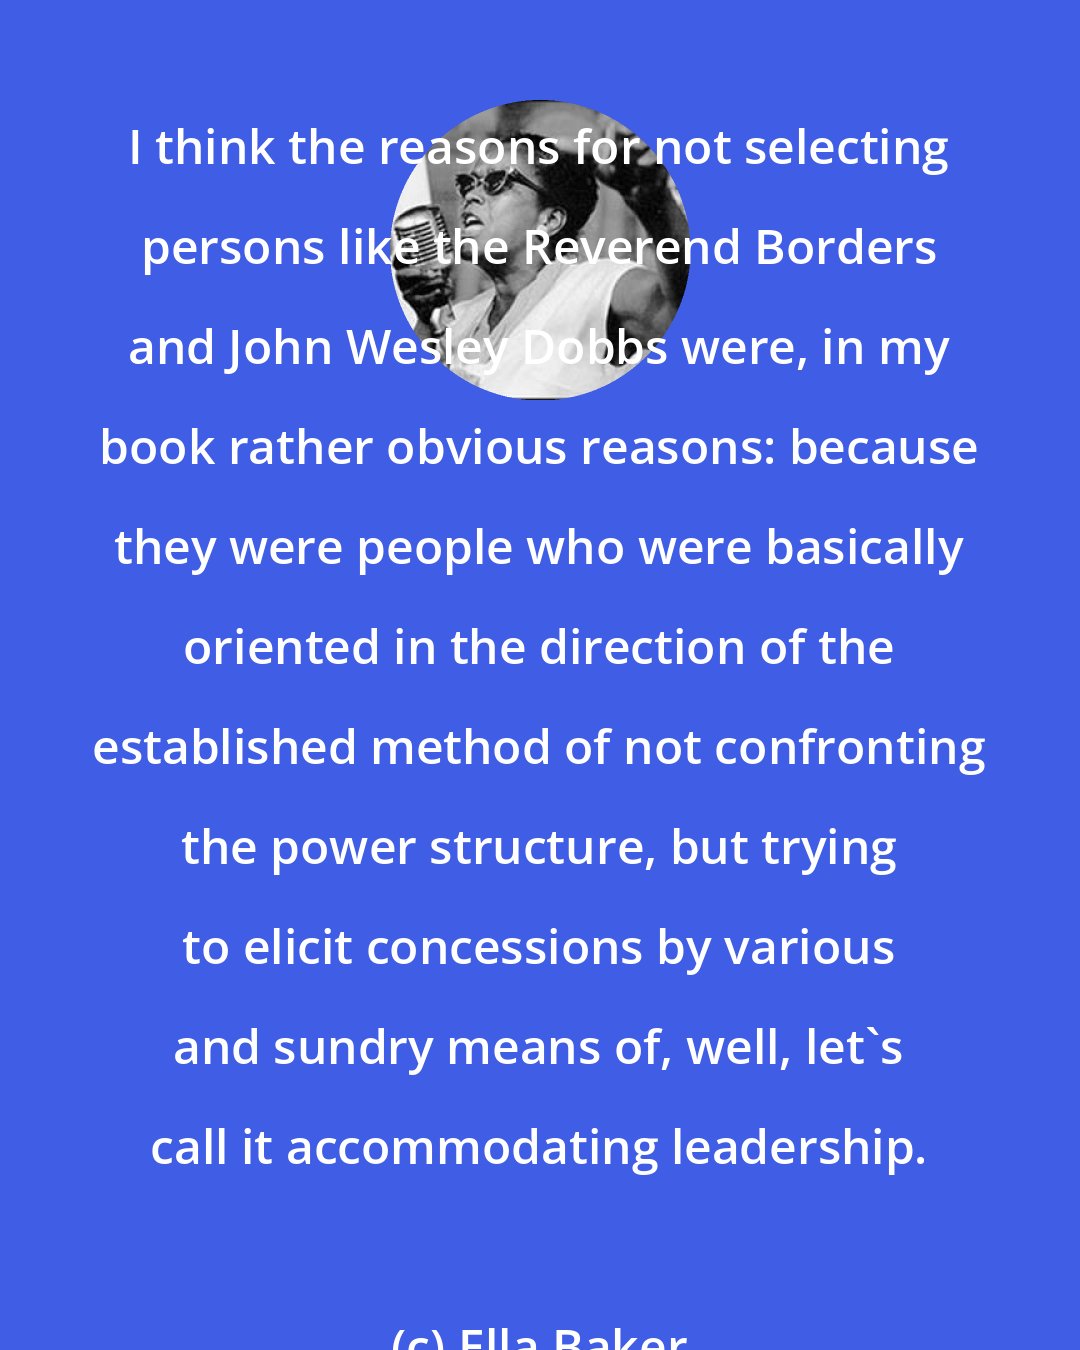 Ella Baker: I think the reasons for not selecting persons like the Reverend Borders and John Wesley Dobbs were, in my book rather obvious reasons: because they were people who were basically oriented in the direction of the established method of not confronting the power structure, but trying to elicit concessions by various and sundry means of, well, let's call it accommodating leadership.